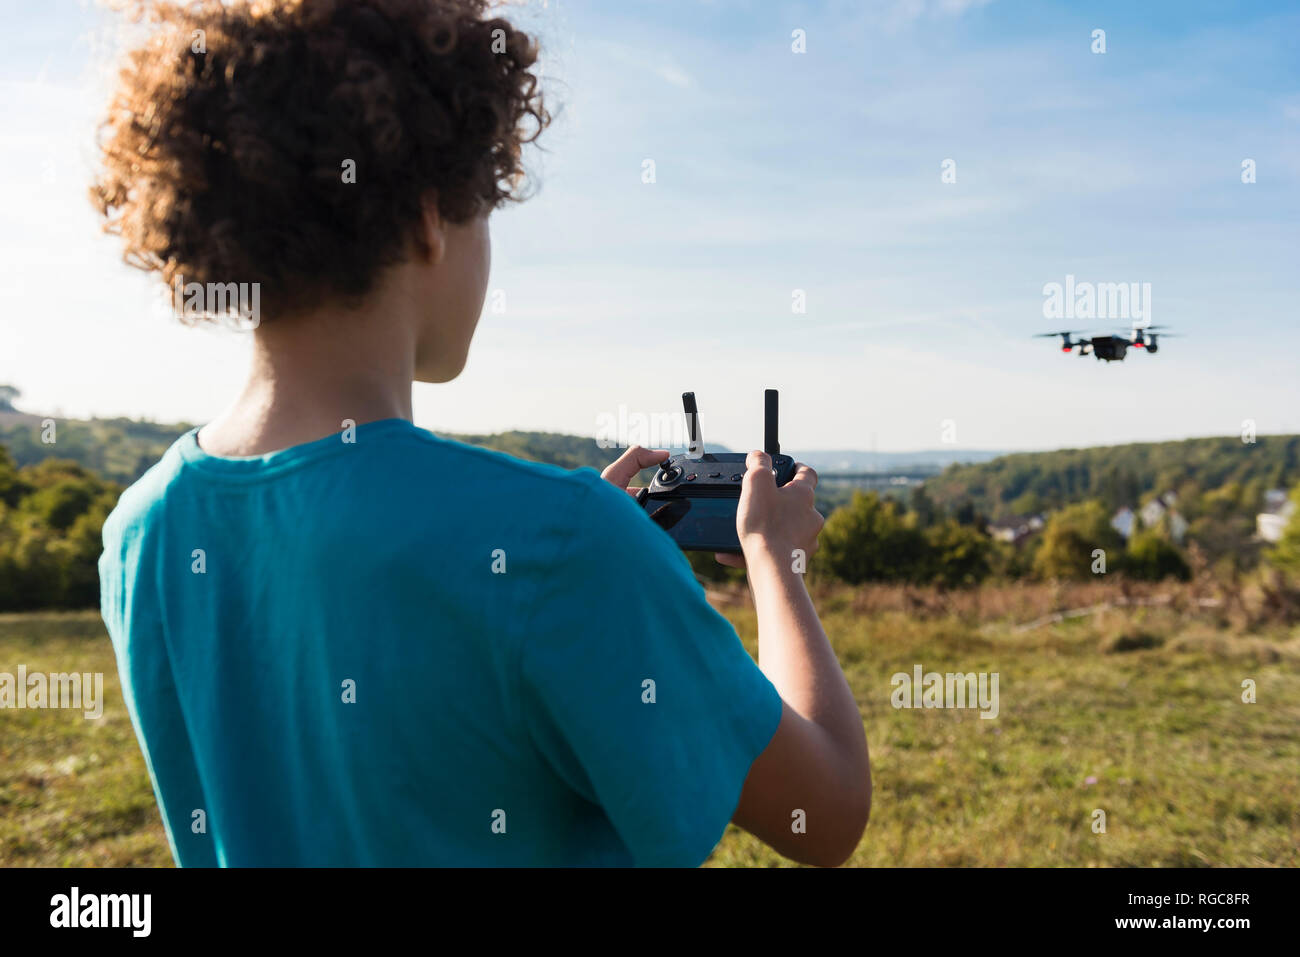 Boy navigating a flying drone outdoors Stock Photo